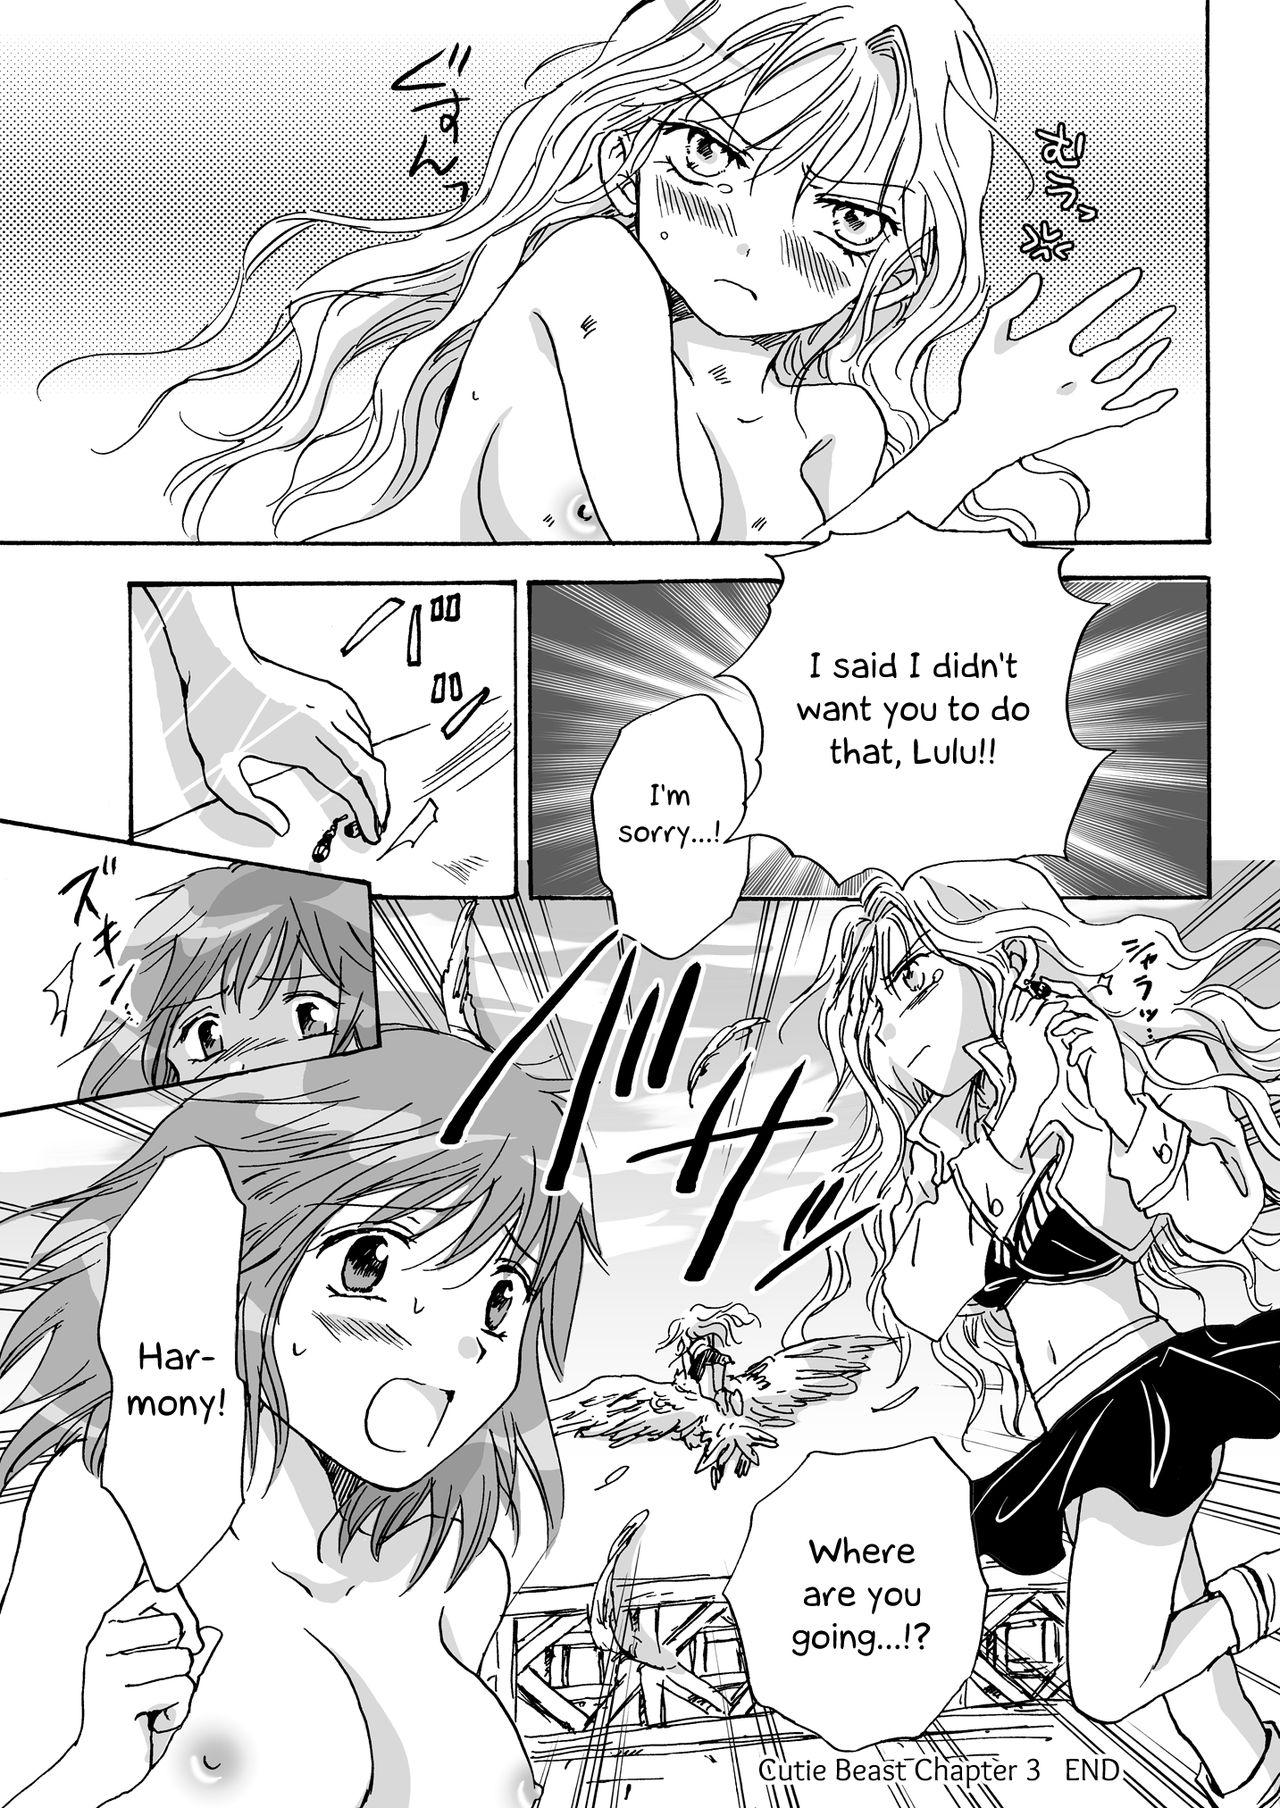 Pussylicking Cutie Beast Complete Edition Ch. 1-3 - Original Hardcore Sex - Page 57